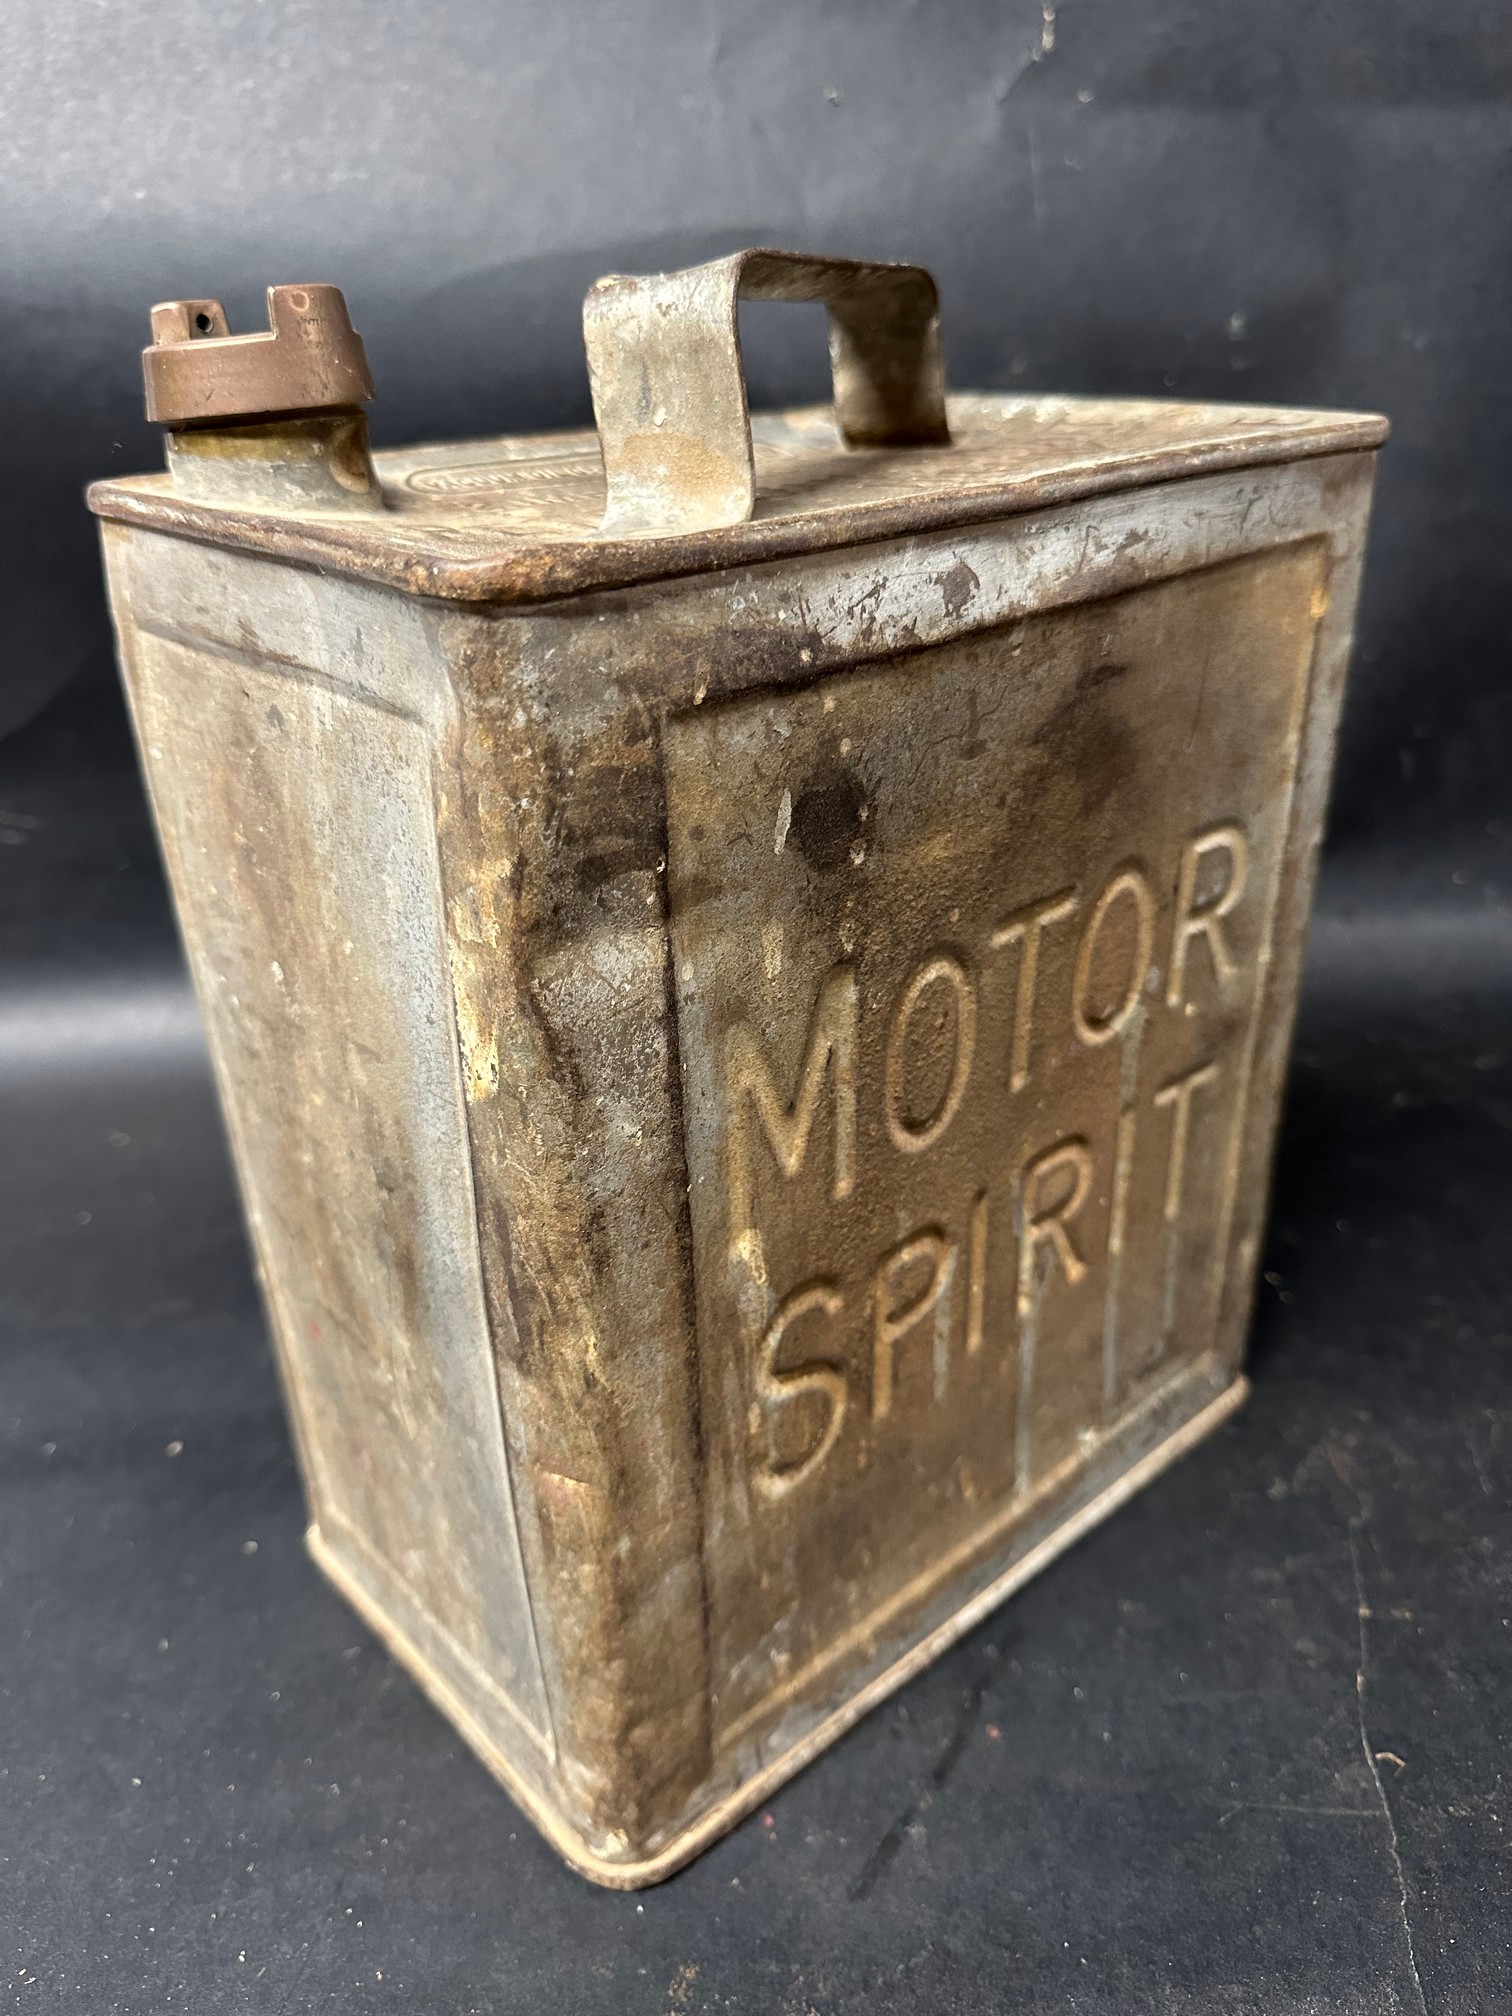 A Vaccum Oil Co. South Africa 'Motor Spirit' two gallon petrol can, Valor 12 31 to base, with - Image 2 of 5